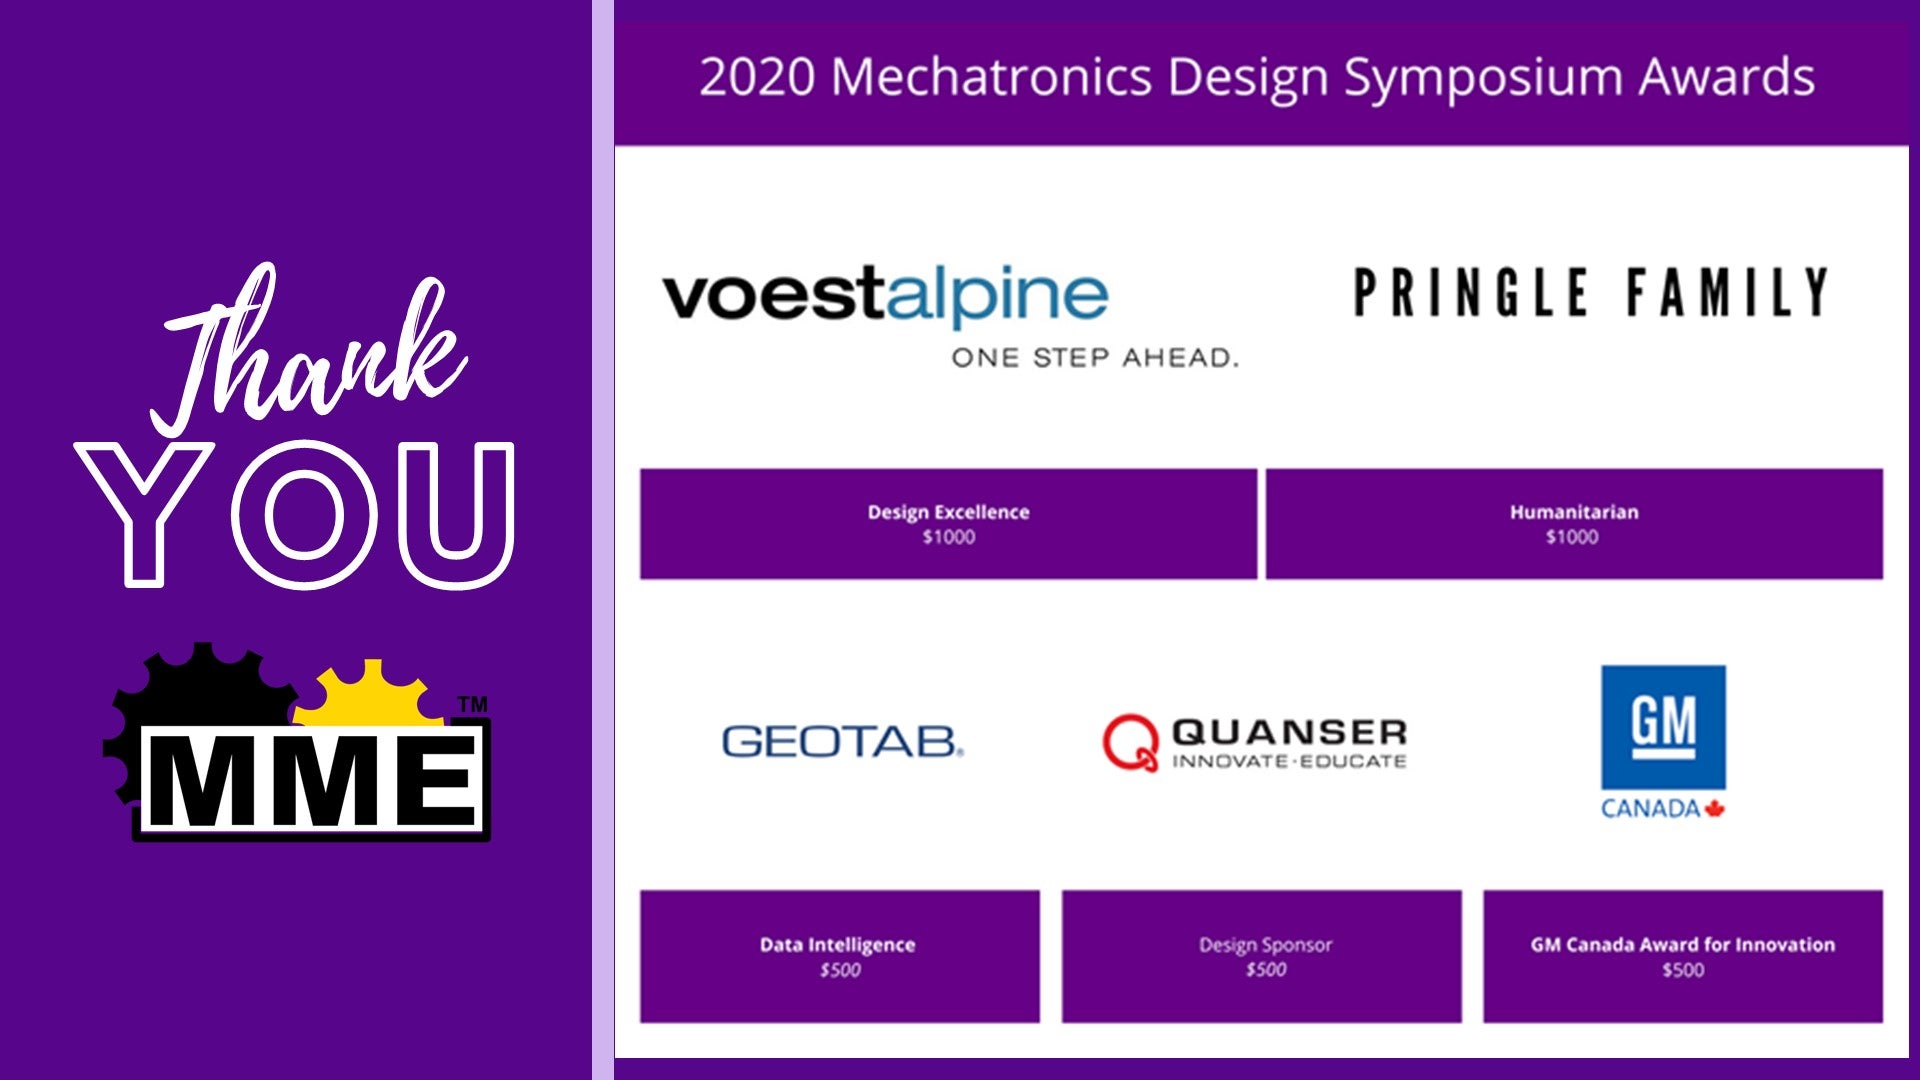 Thank you to our sponsors: Voestalpine, Pringle Family, GeoTab, Quanser, GM Canada...